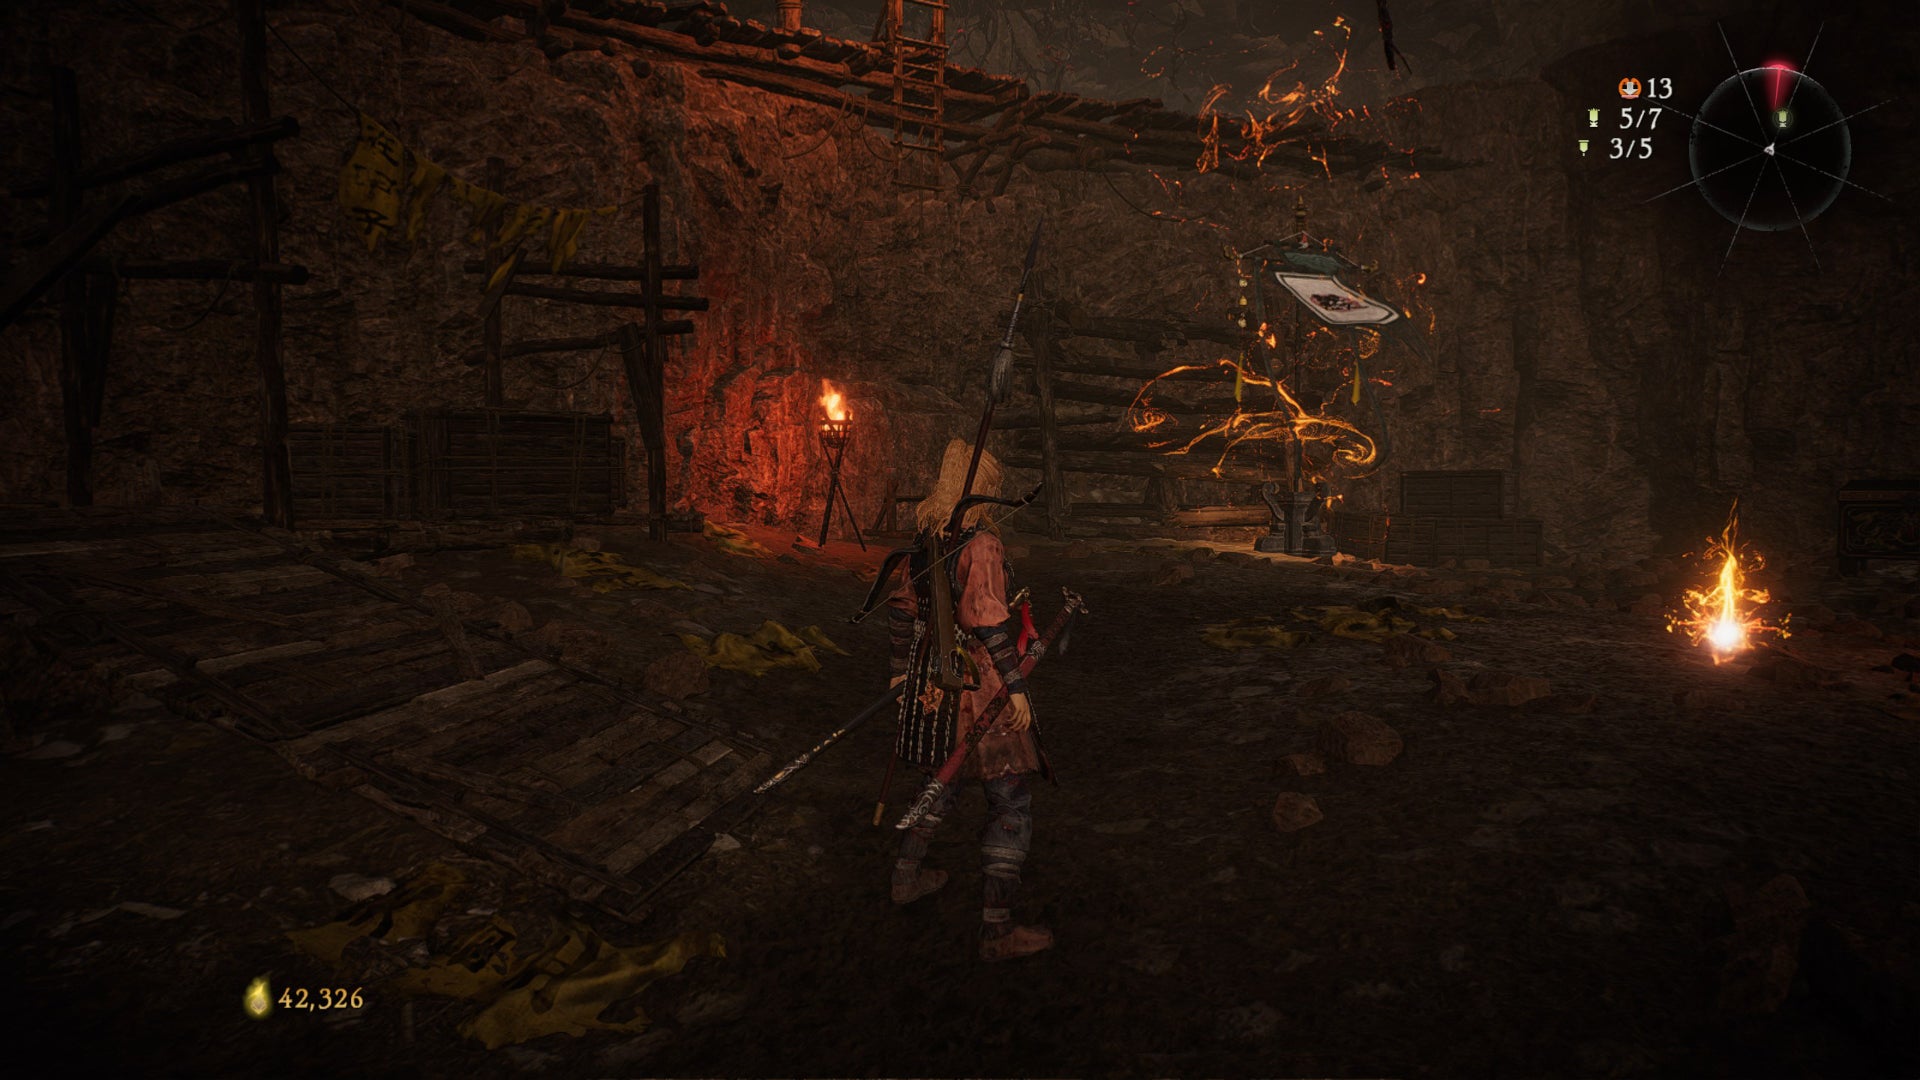 A Wo Long: Fallen Dynasty screenshot of the player standing next to a flag.